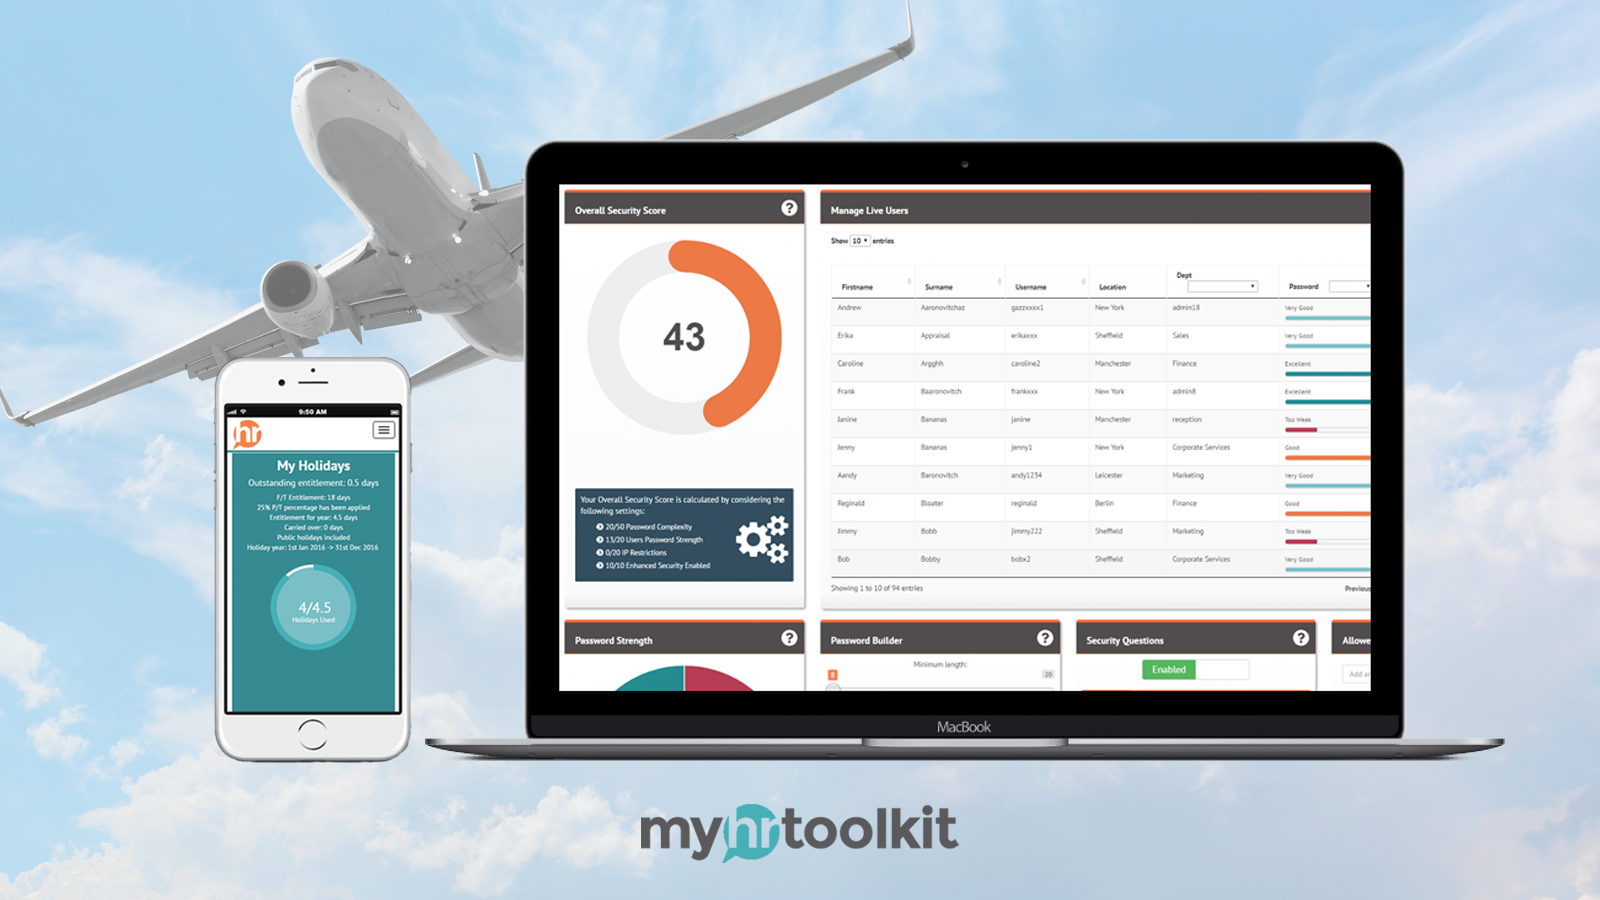 Myhrtoolkit cloud holiday management software